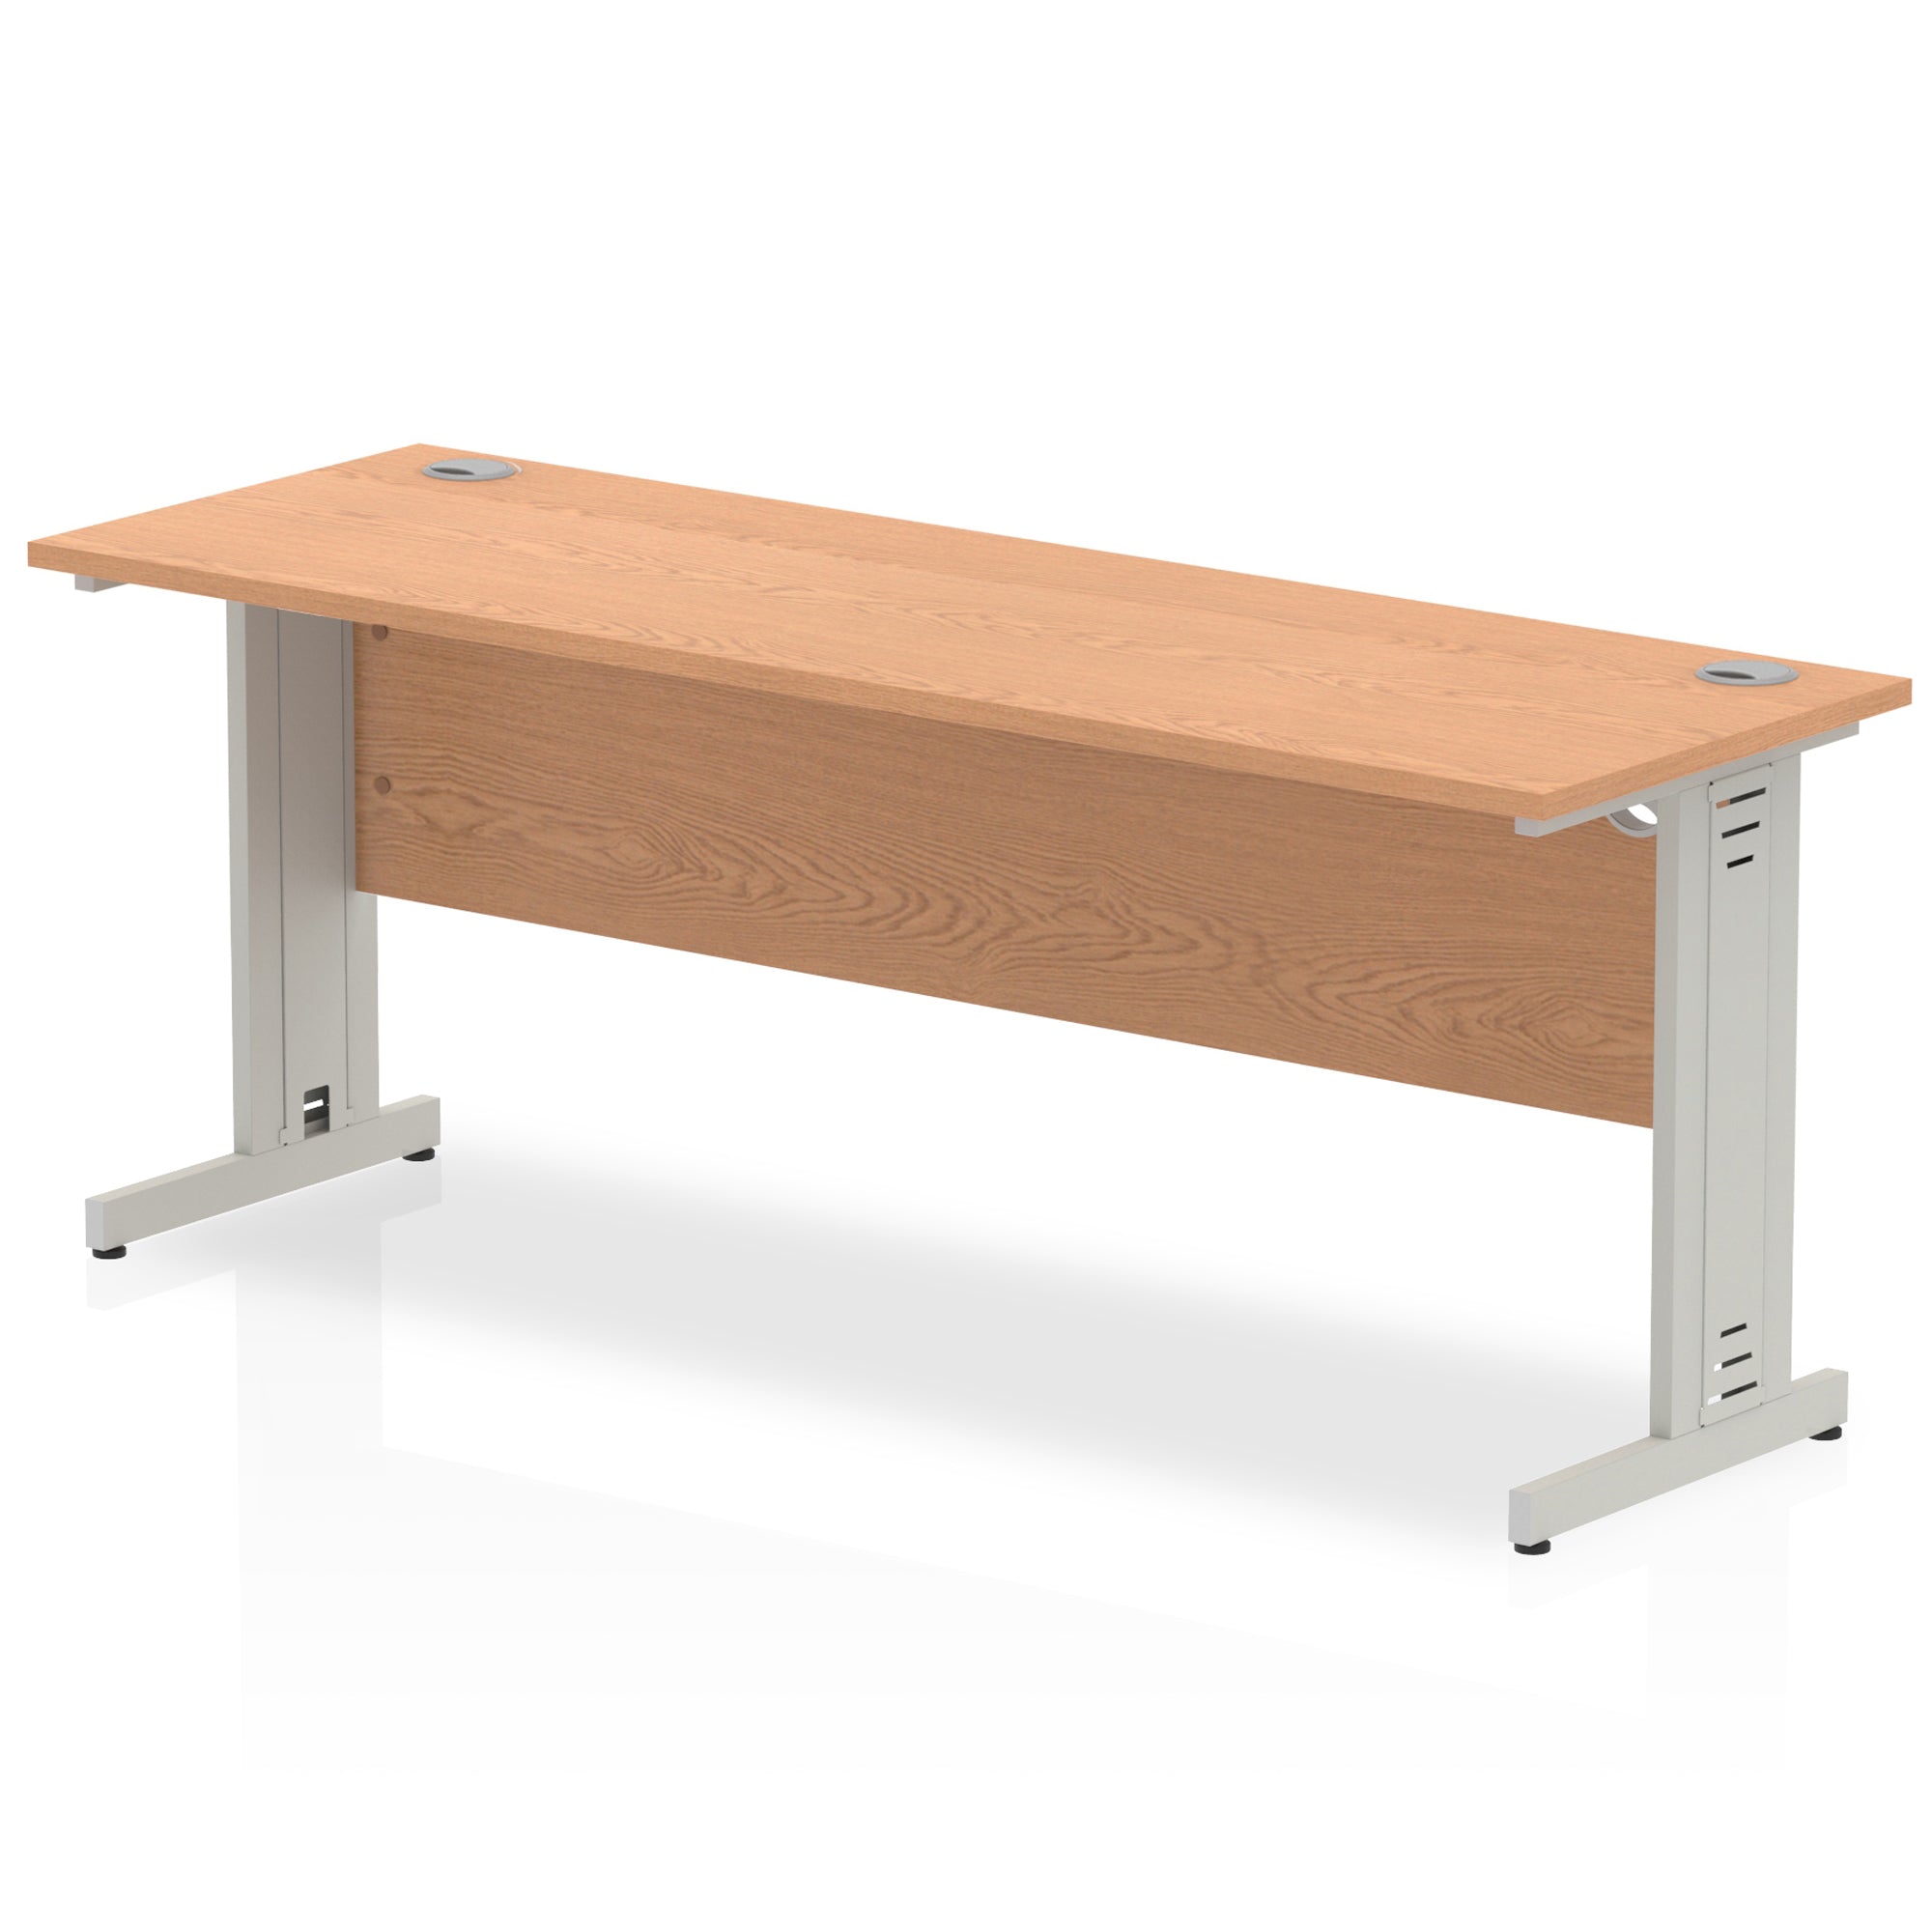 Impulse 1800mm Slimline Desk with Cable Managed Leg - MFC Rectangular Table, Self-Assembly, 5-Year Guarantee, 1800x600, Silver/White Frame